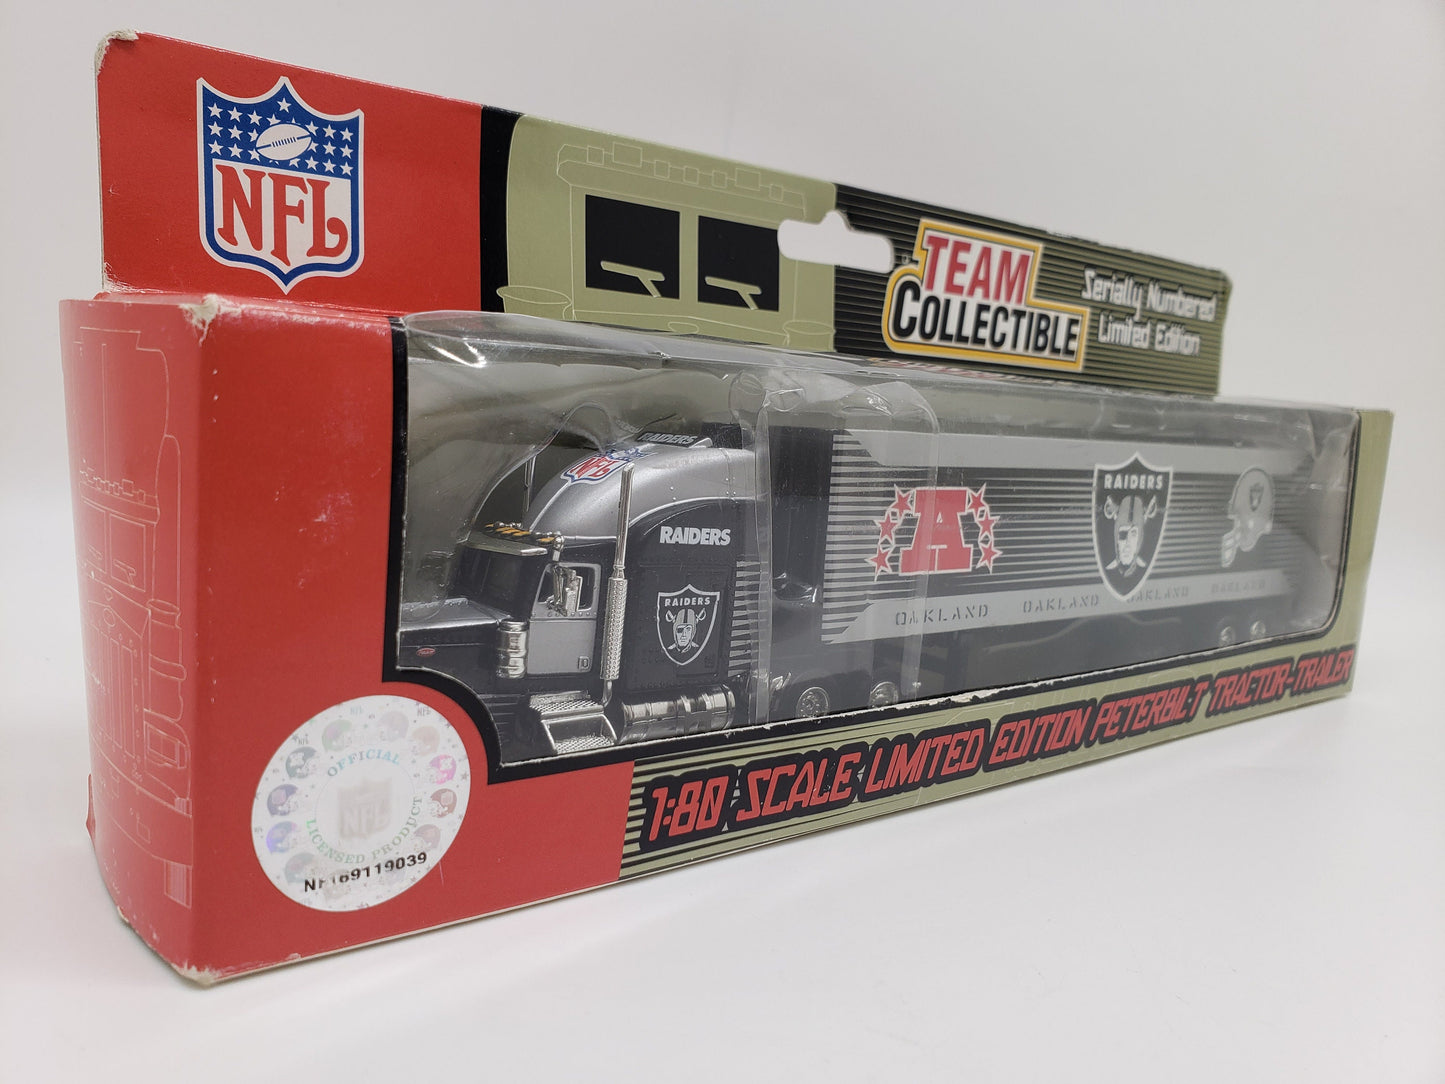 Peterbilt Tractor-Trailer Oakland Raiders Silver and Black Fleer Collectable Scale Miniature Model Toy Car Perfect Birthday Gift